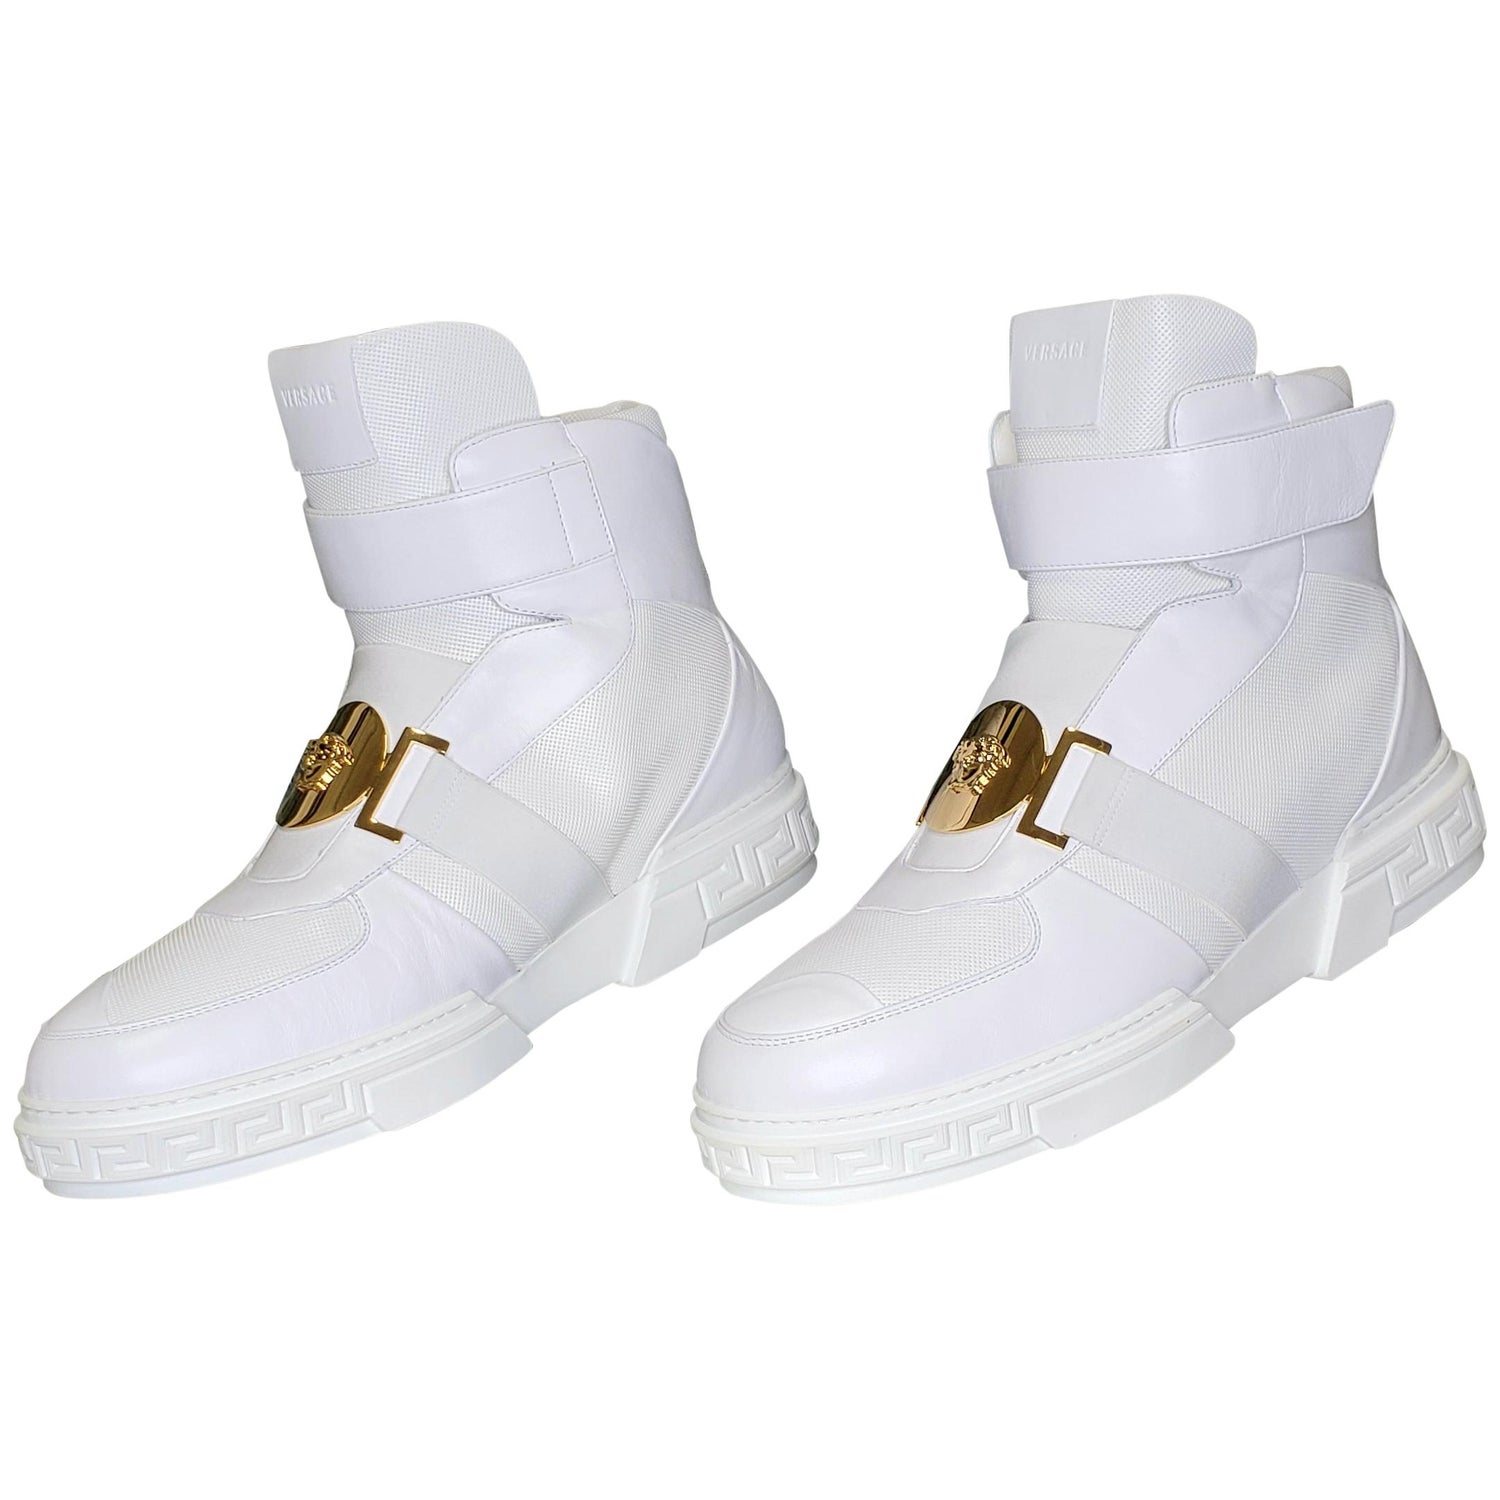 New VERSACE HIGH -TOP WHITE LEATHER SNEAKERS GOLD MEDUSA 46 - 13 at 1stDibs  | versace high top sneakers, medusa head 13 shoes, versace high top sneakers  white